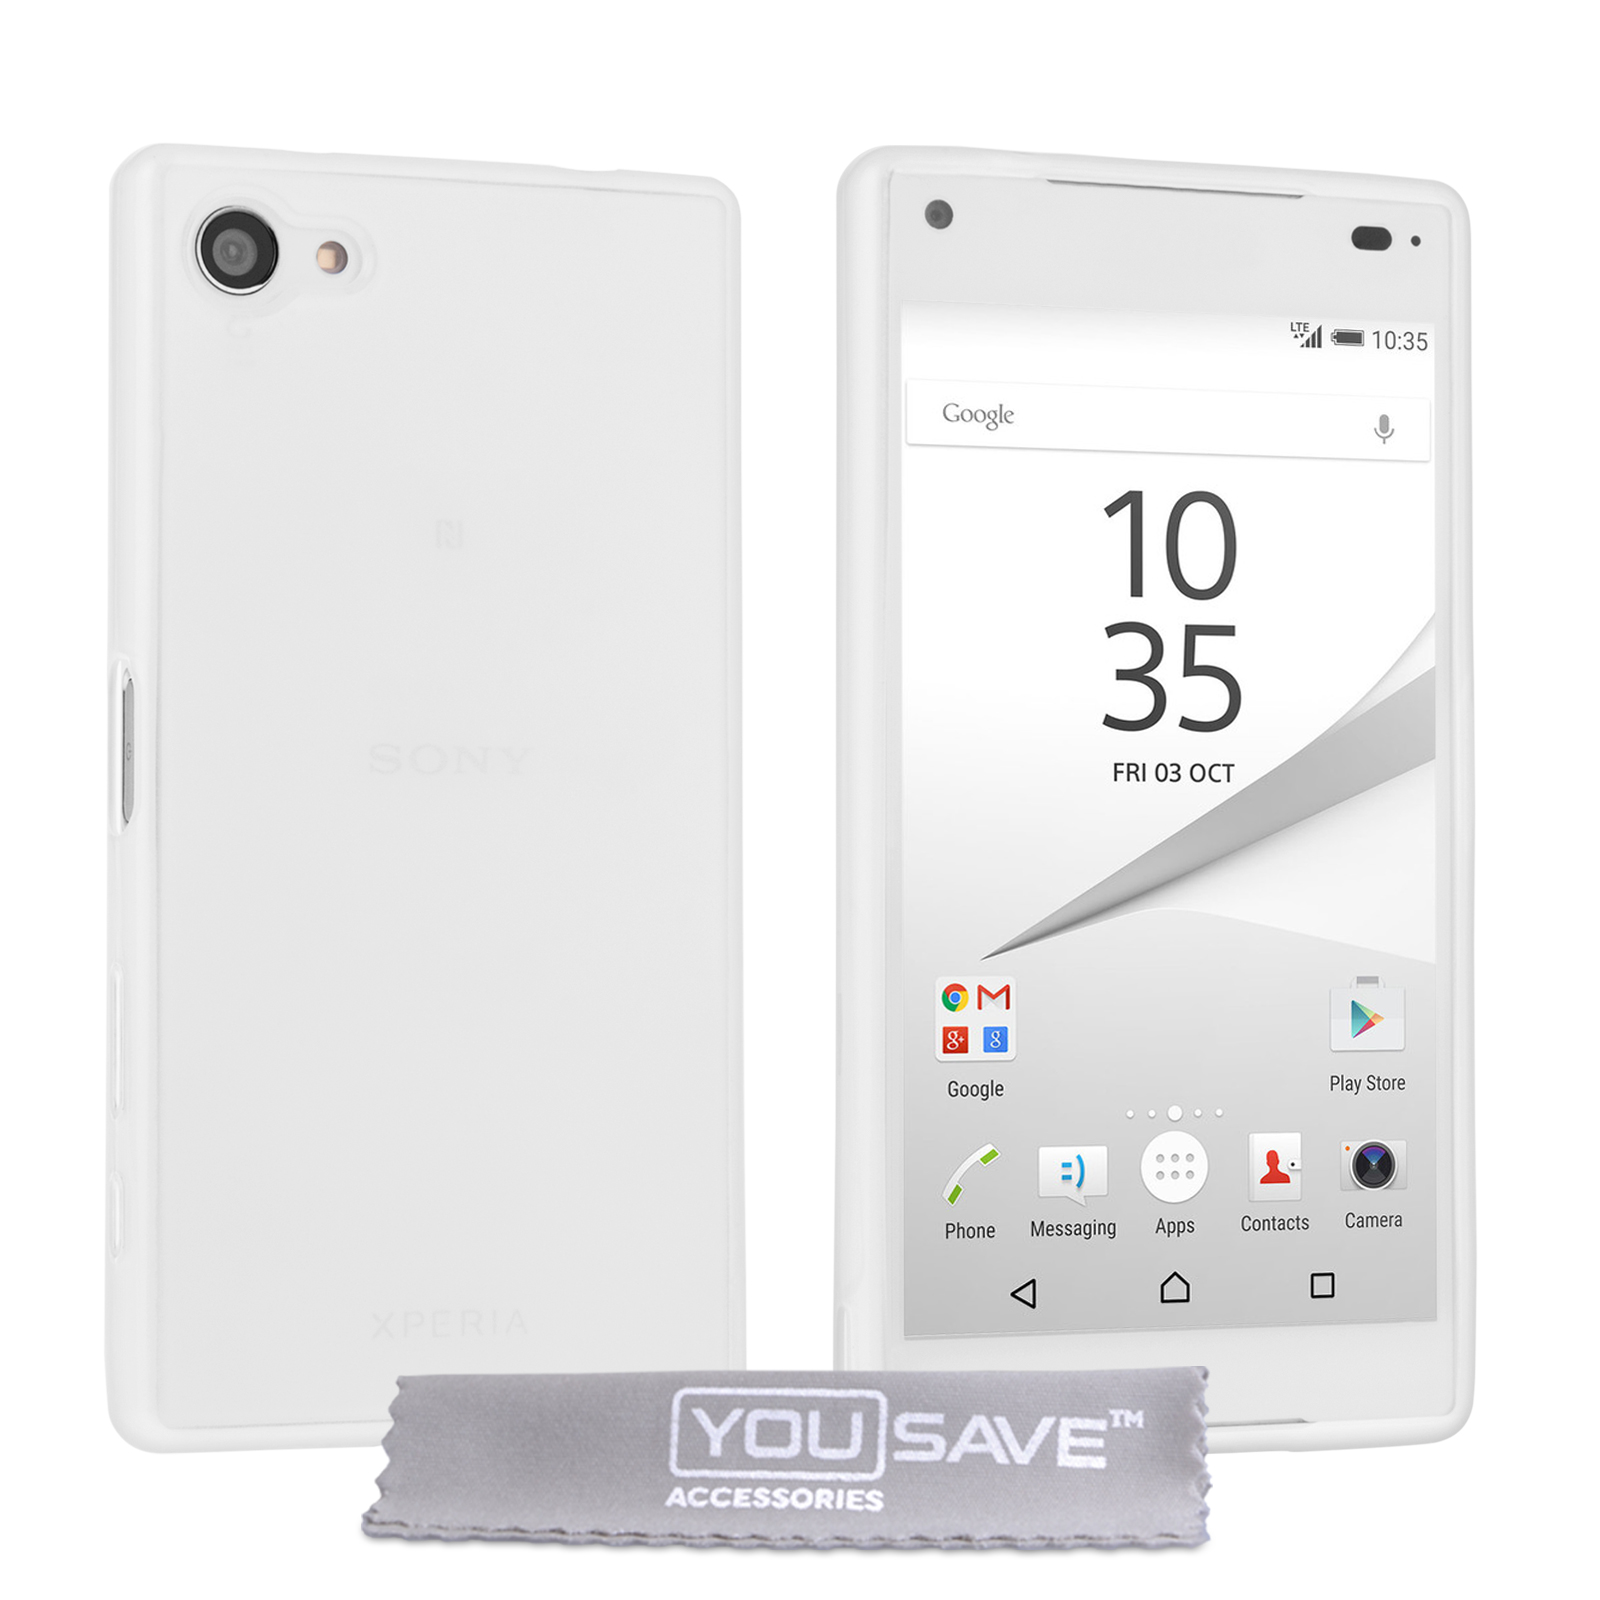 Plunderen Overtreding tabak Yousave Accessories Sony Xperia Z5 Compact 0.6mm Ultra-